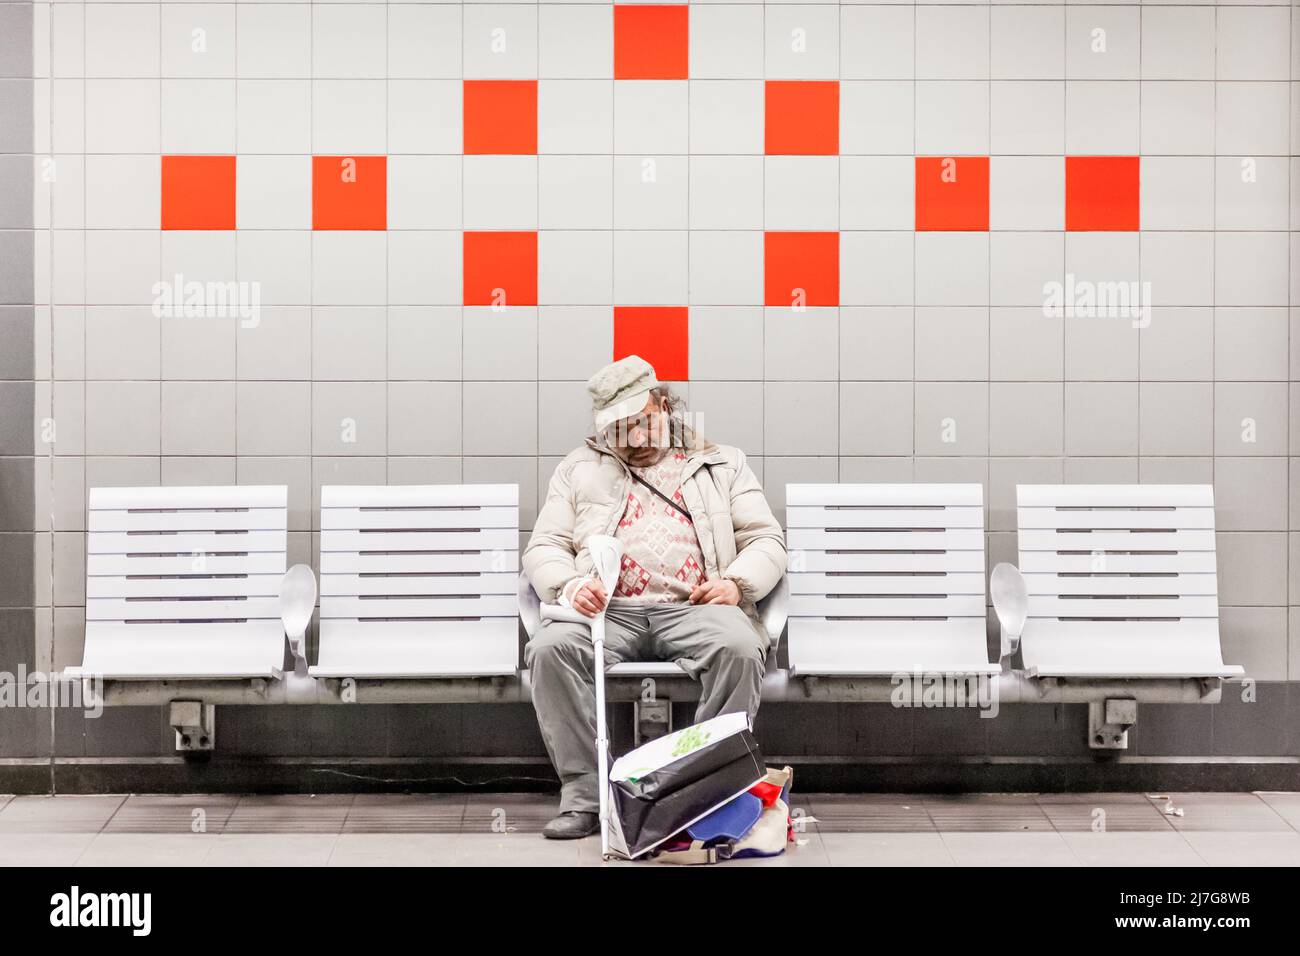 Old man dozing on a bench in a subway station. White wall and red tiles. Brussels. Stock Photo